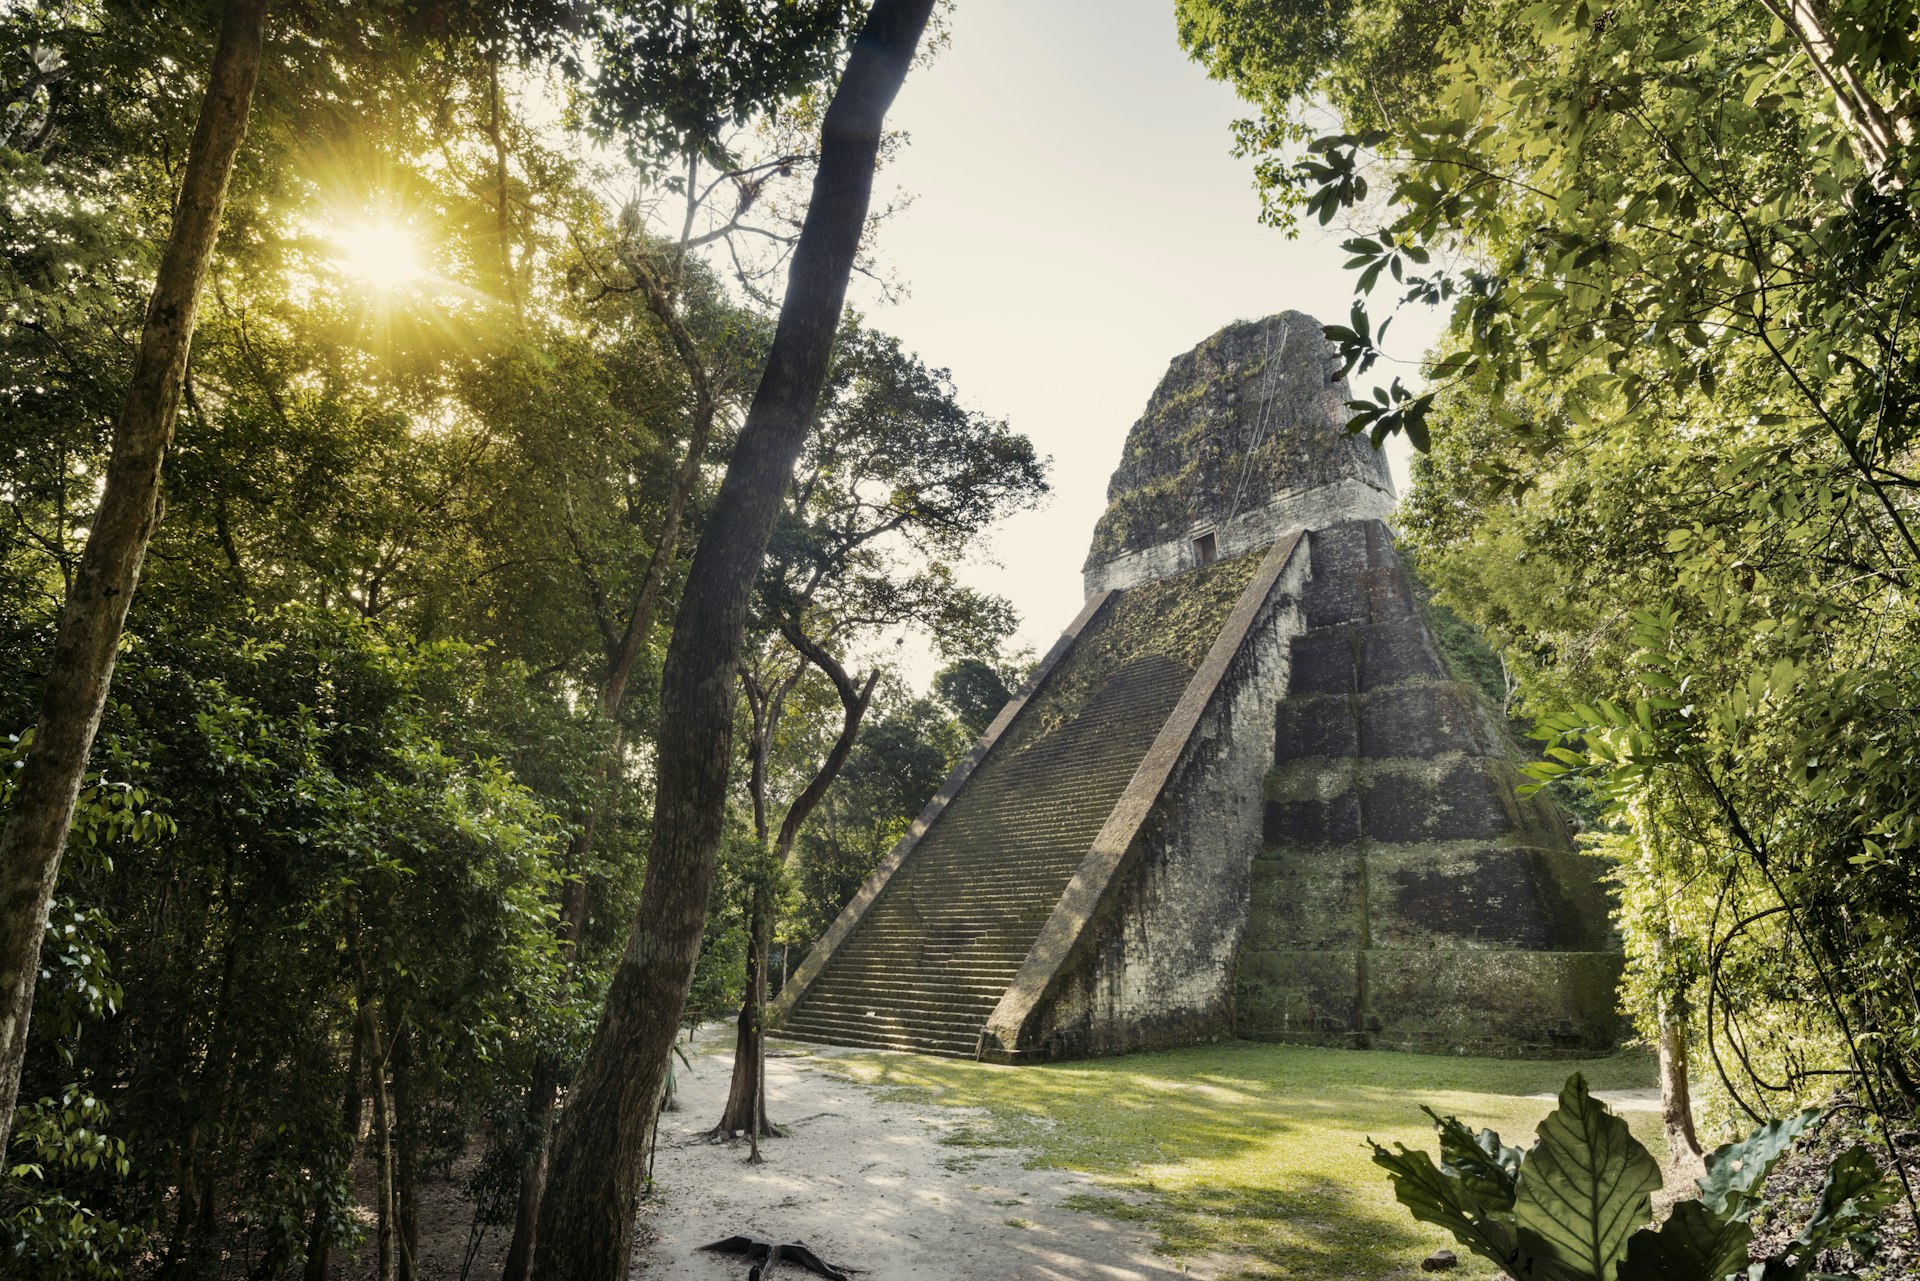 The towering steps of Temple V in Tikal